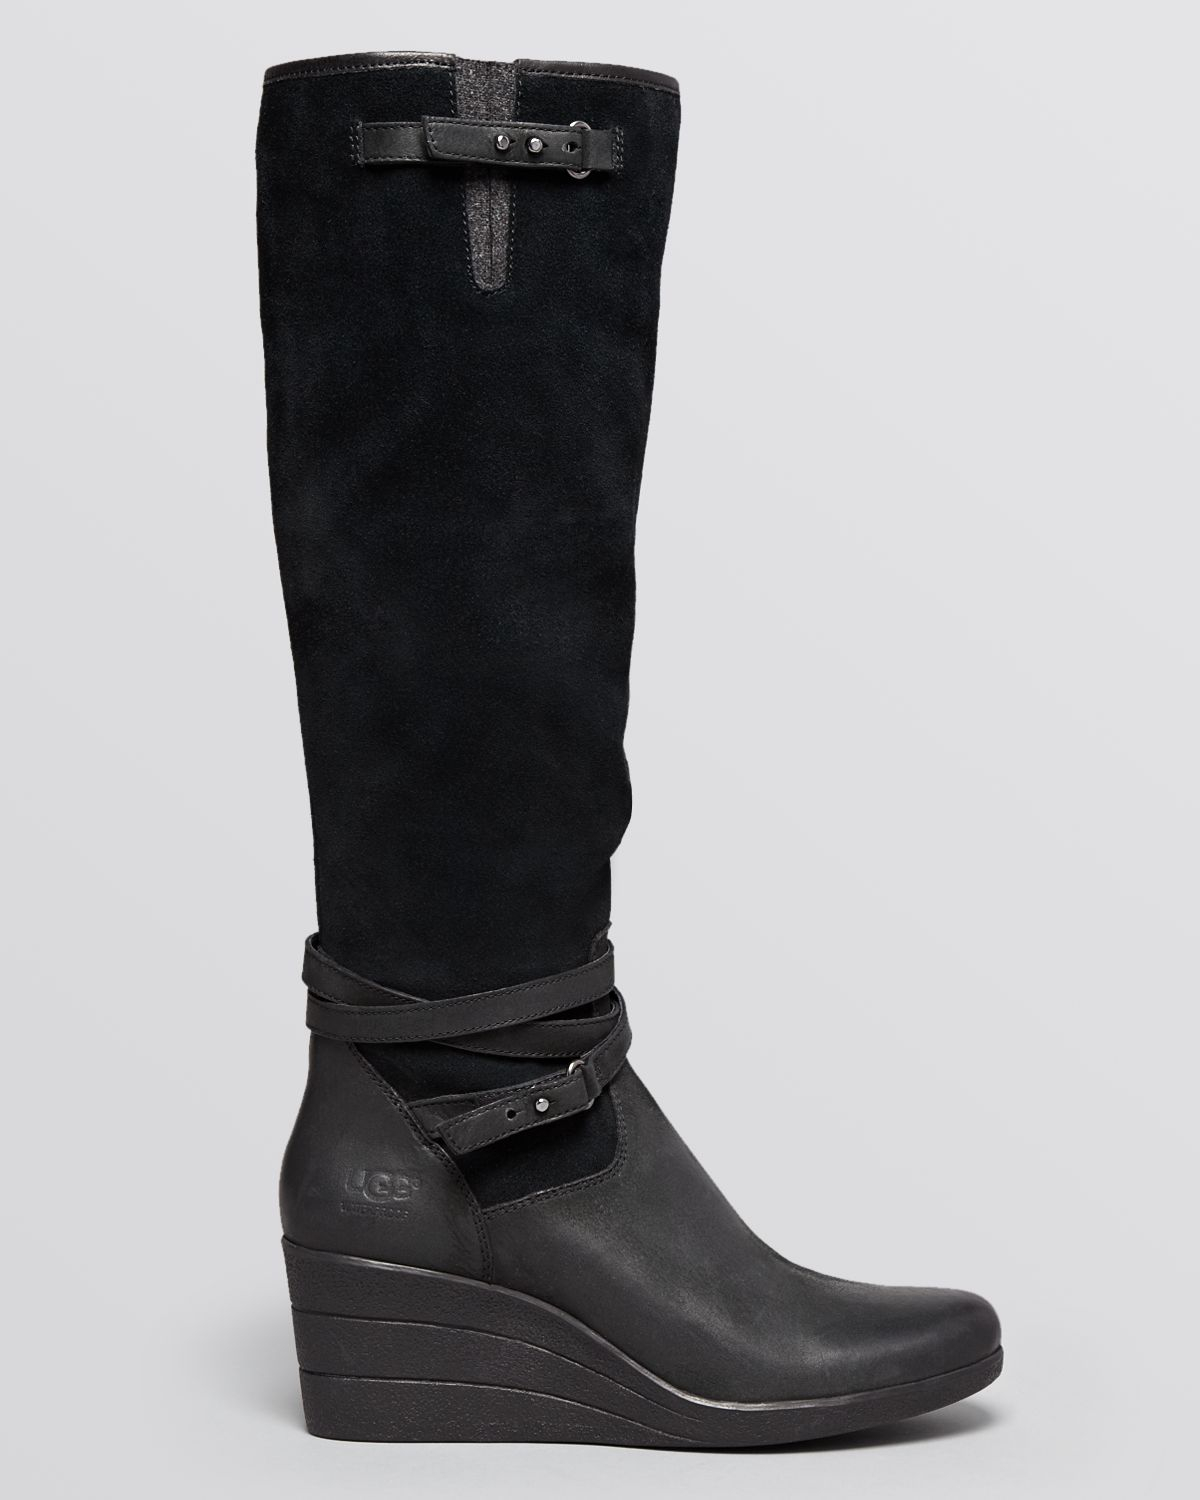 UGG Wool Tall Wedge Boots - Lesley in Black | Lyst